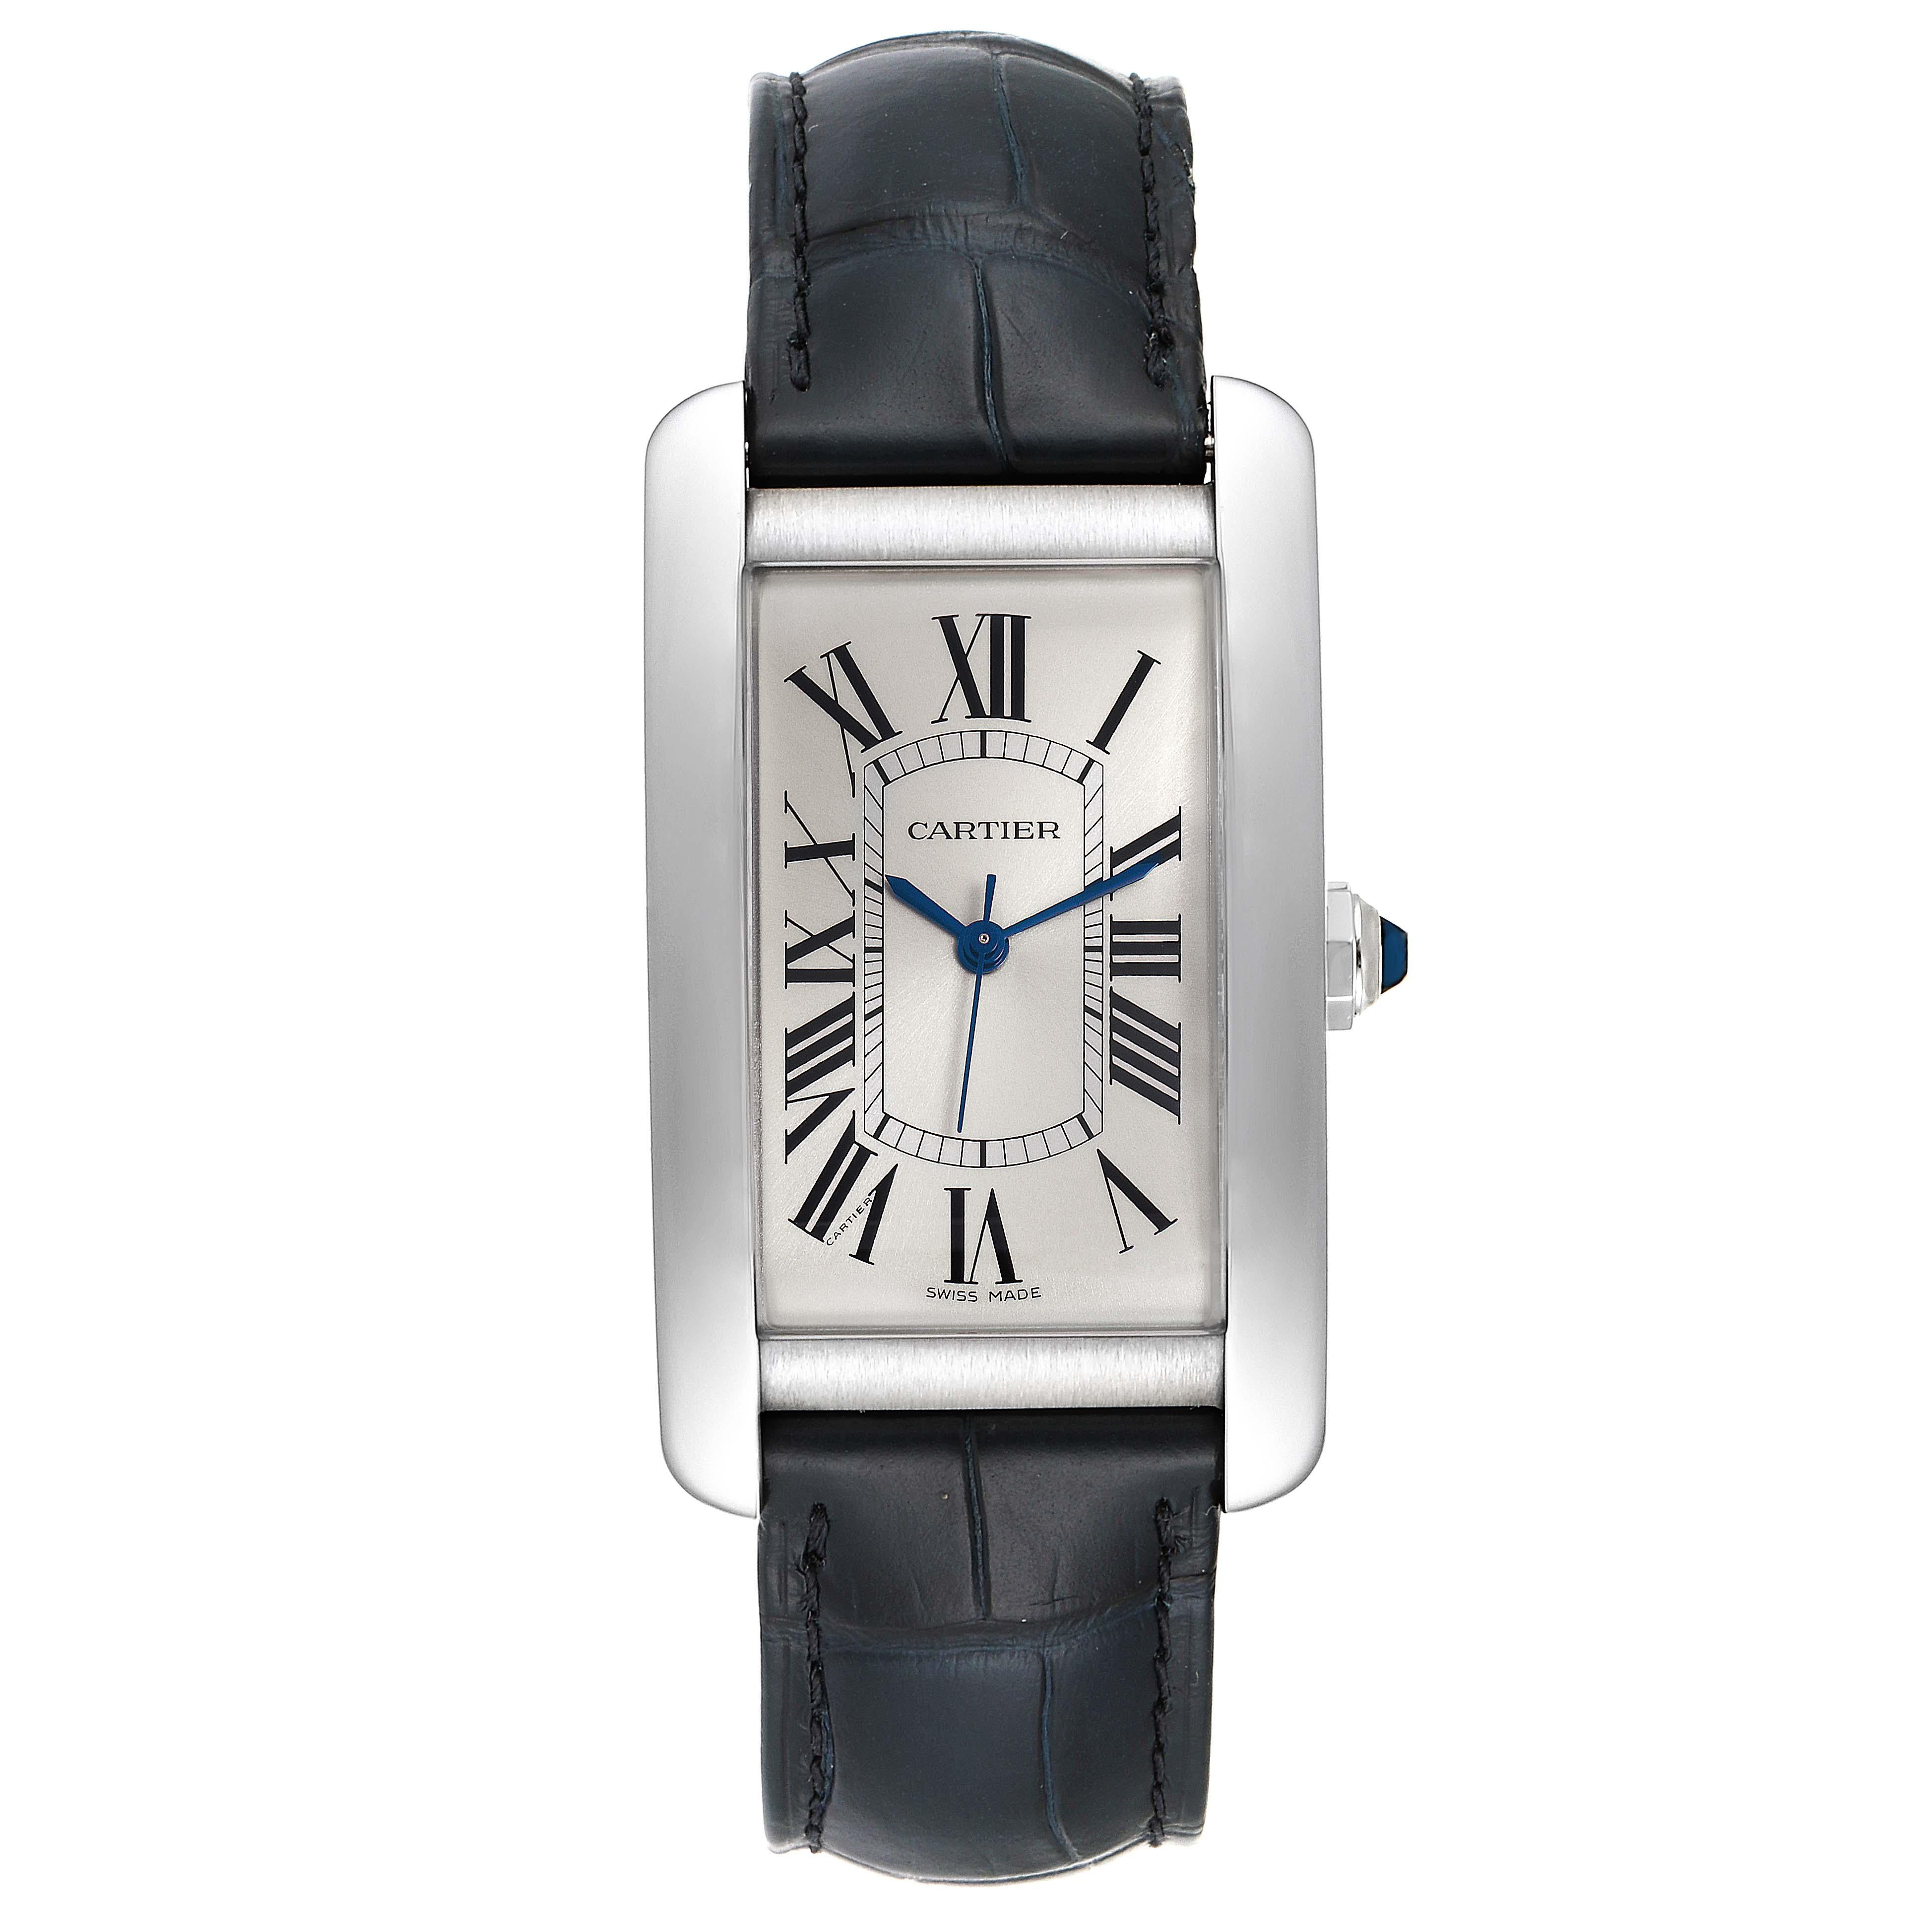 Cartier Tank Americaine White Gold Large Mens Watch WSTA0018 Box Papers. Automatic self-winding movement. 18K white gold case 26.6 x 45.1 mm. Circular grained crown set with faceted blue sapphire. . Scratch resistant sapphire crystal. Silvered dial